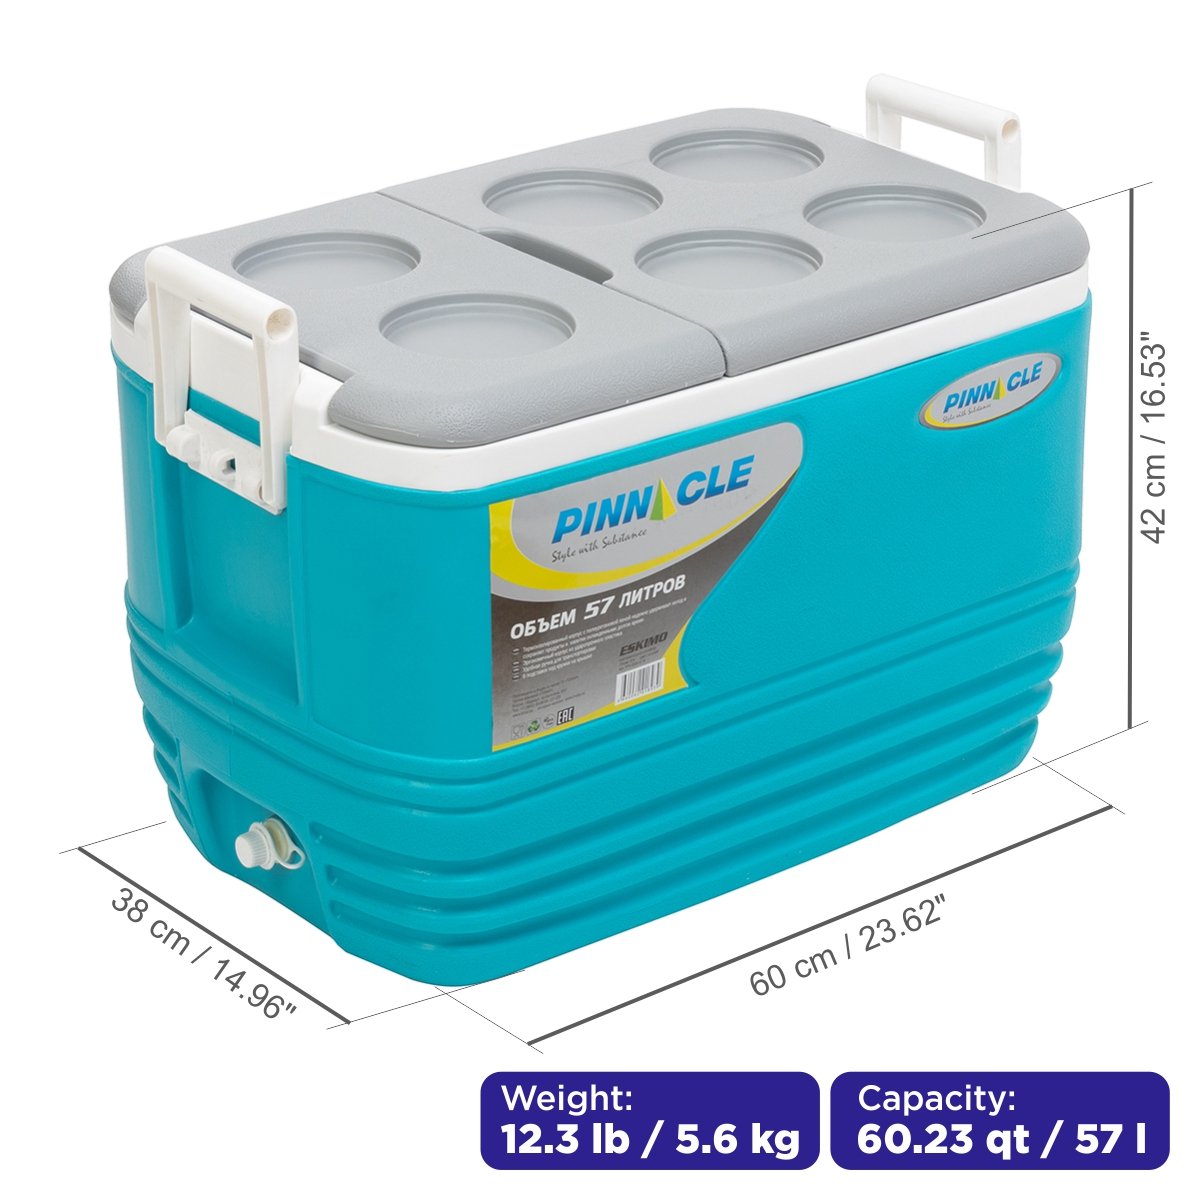 Eskimo Large Ice Chest with Side Handle, Drain Plug and 6 Cup Holders, 60 qt is 23.6 inches long, 15 inches wide and 16.5 inches high, weighing 12.3 lb